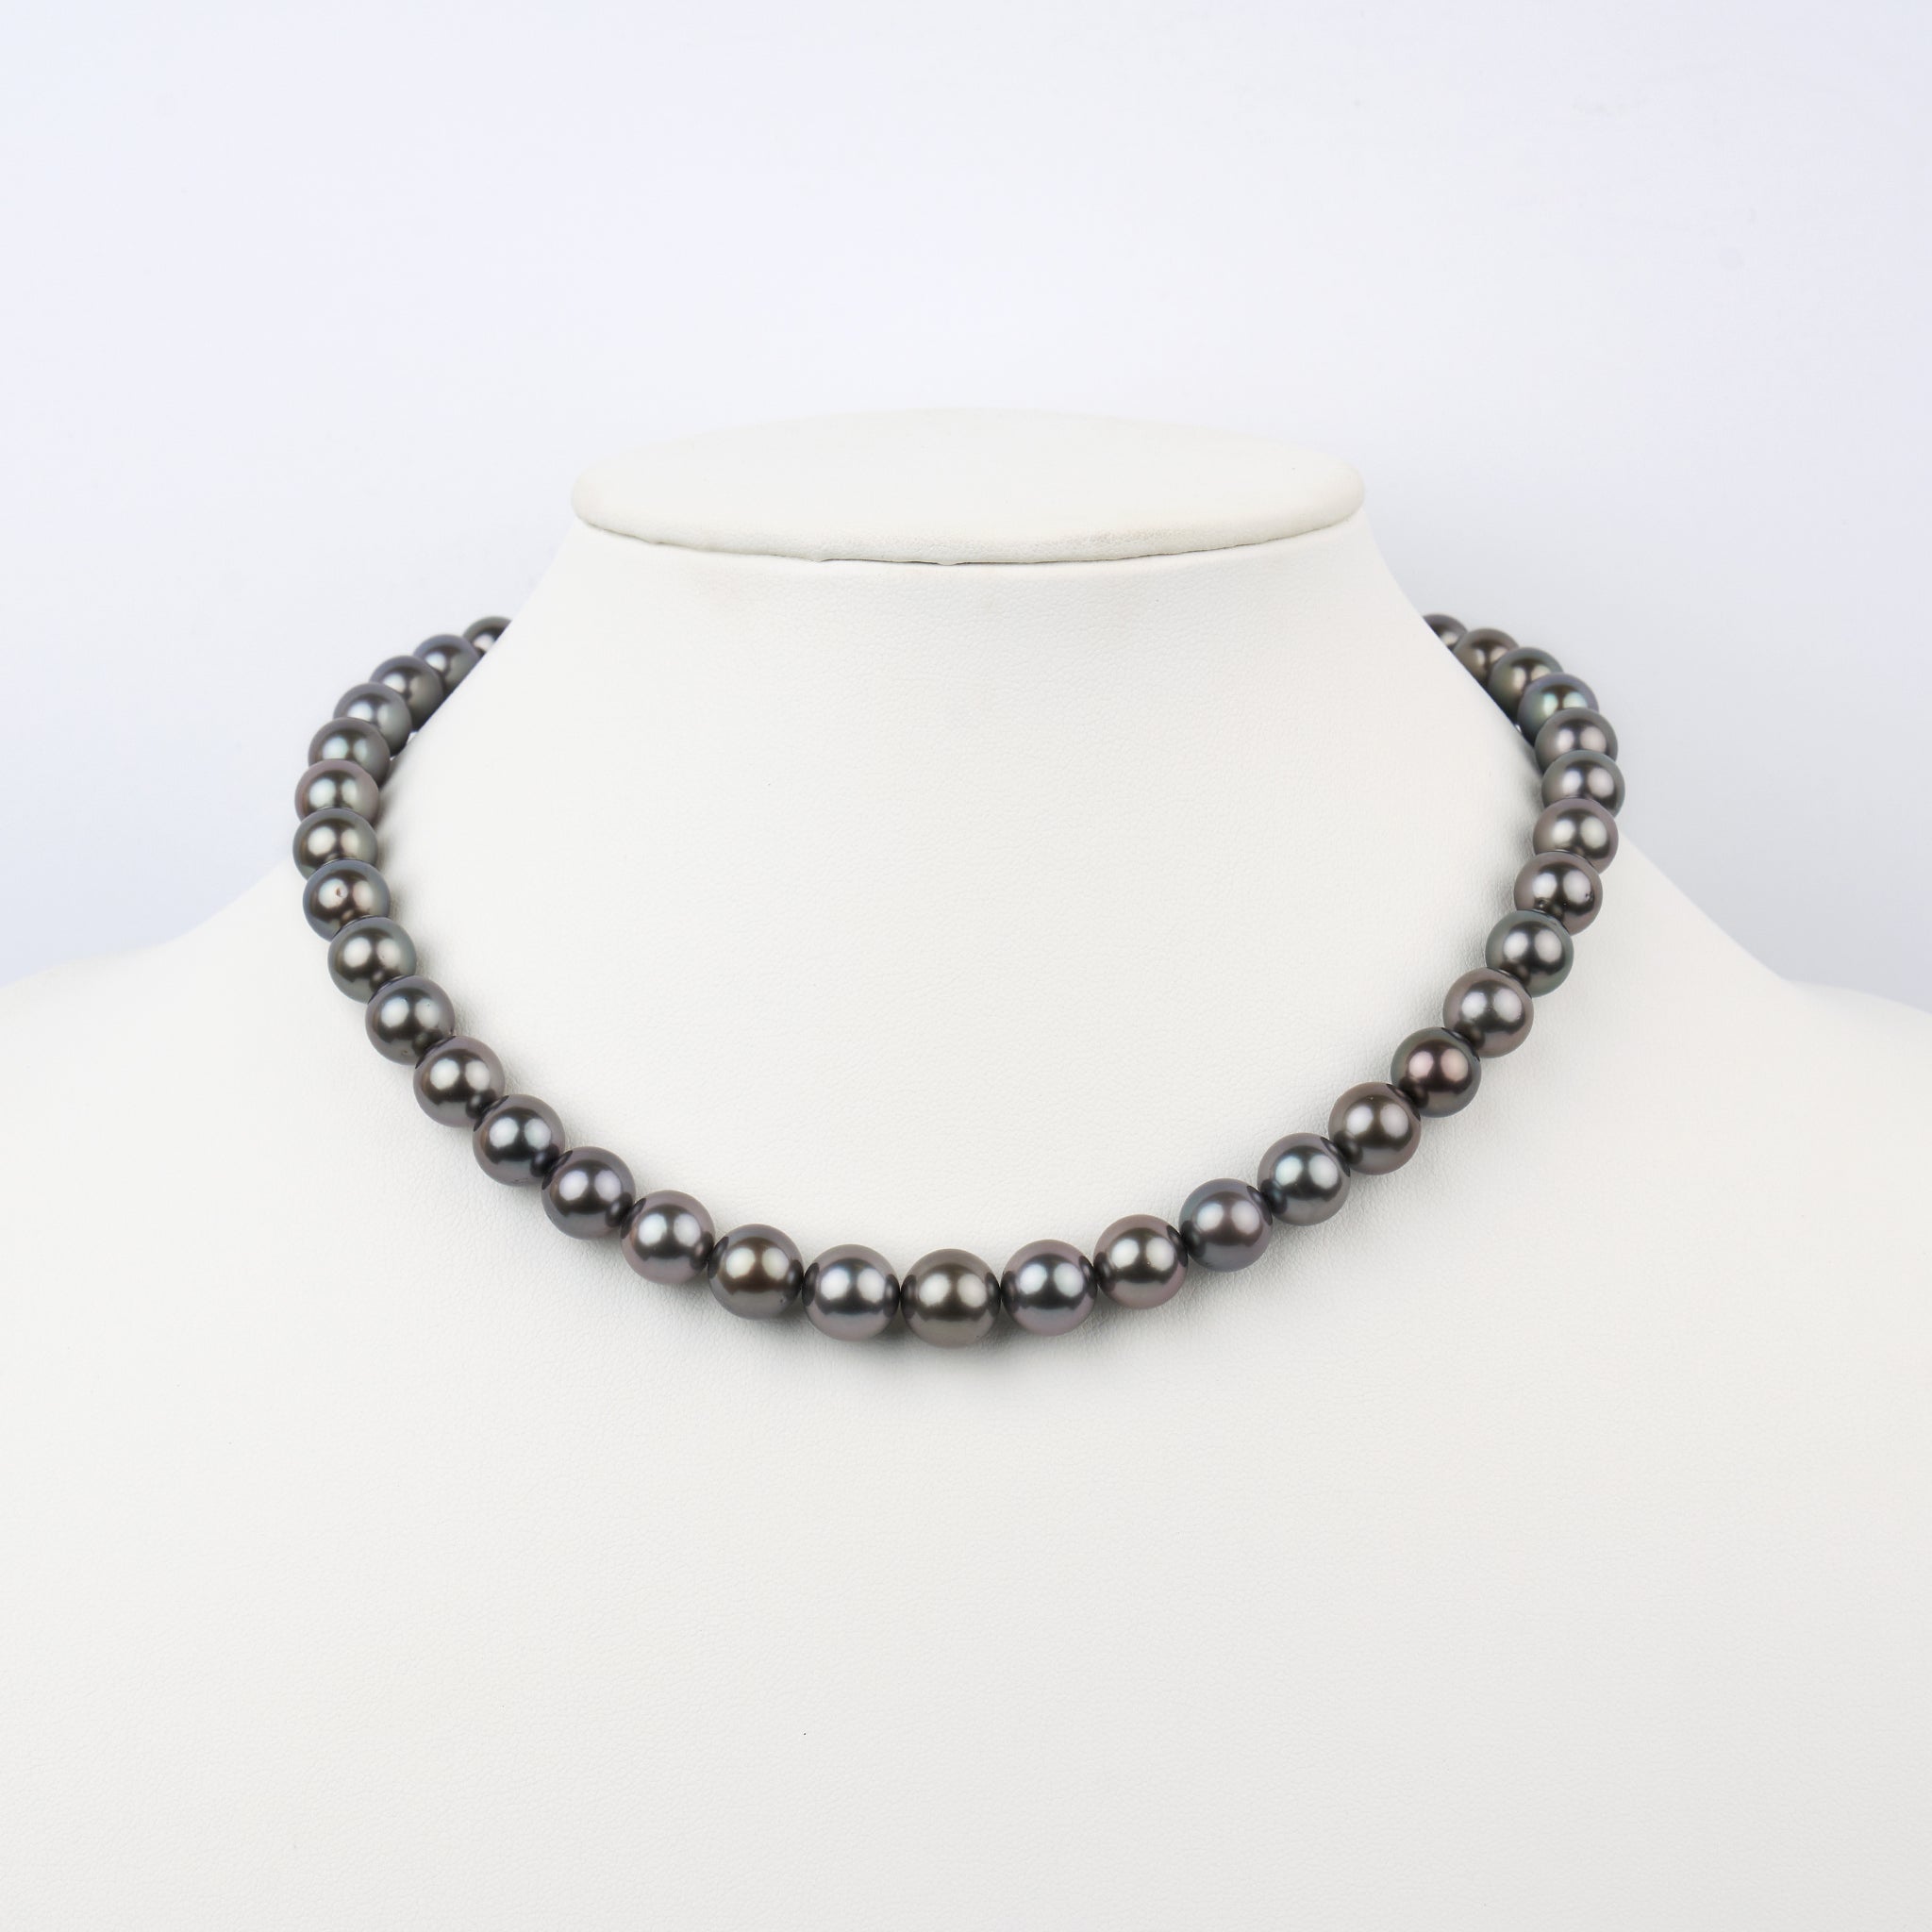 8.0-10.6 mm AAA Tahitian Round Pearl Necklace Bust